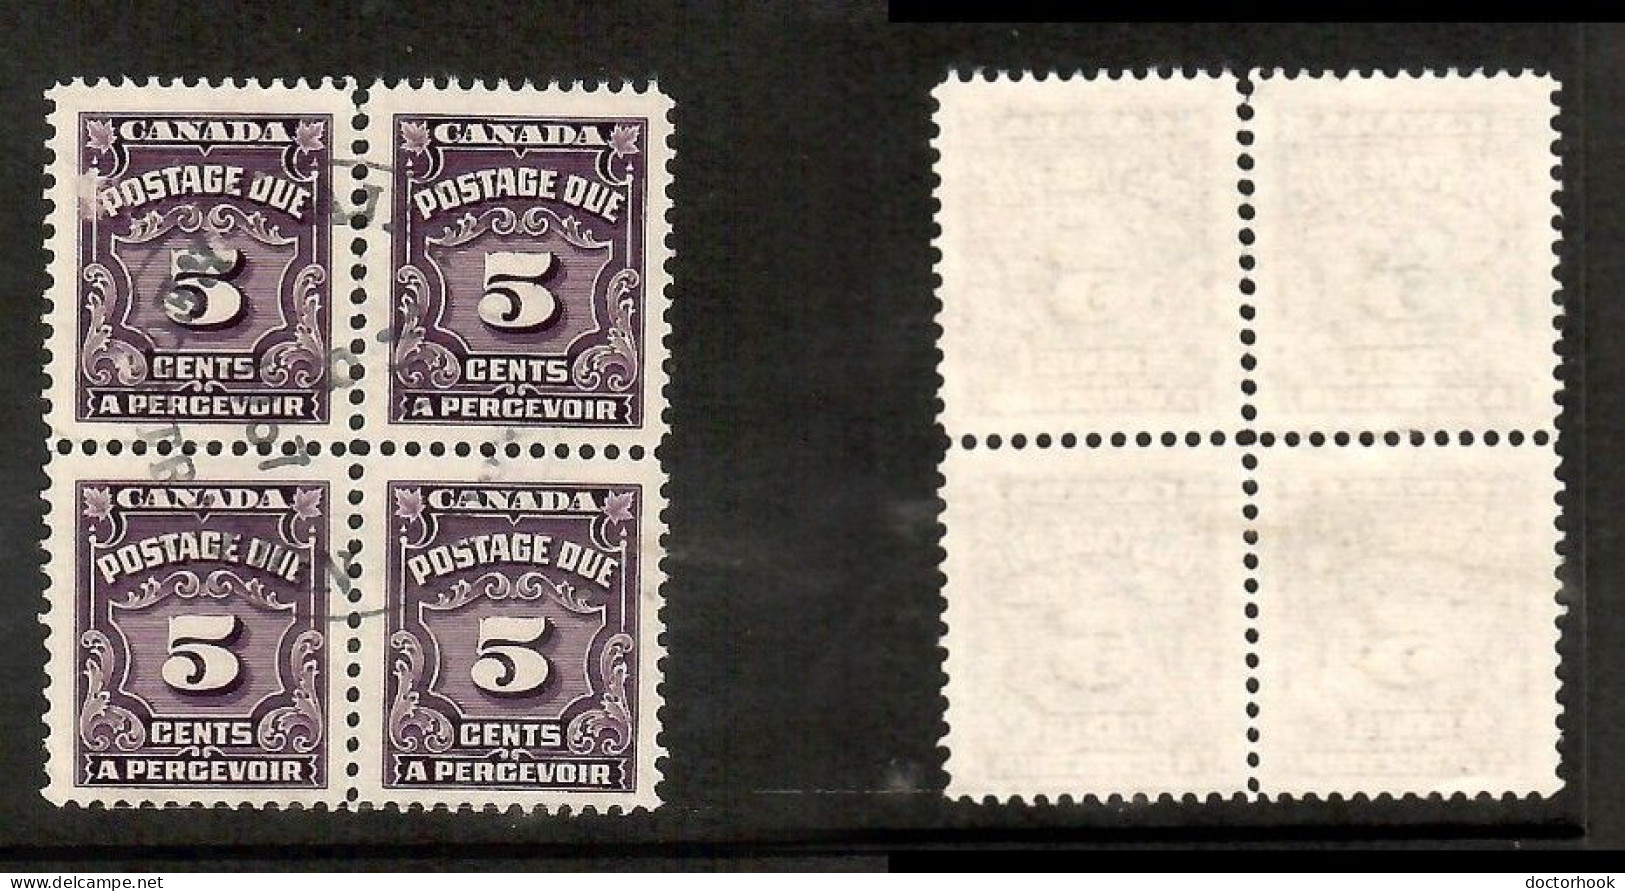 CANADA   Scott # J 18 USED BLOCK Of 4 (CONDITION AS PER SCAN) (CAN-202) - Hojas Bloque